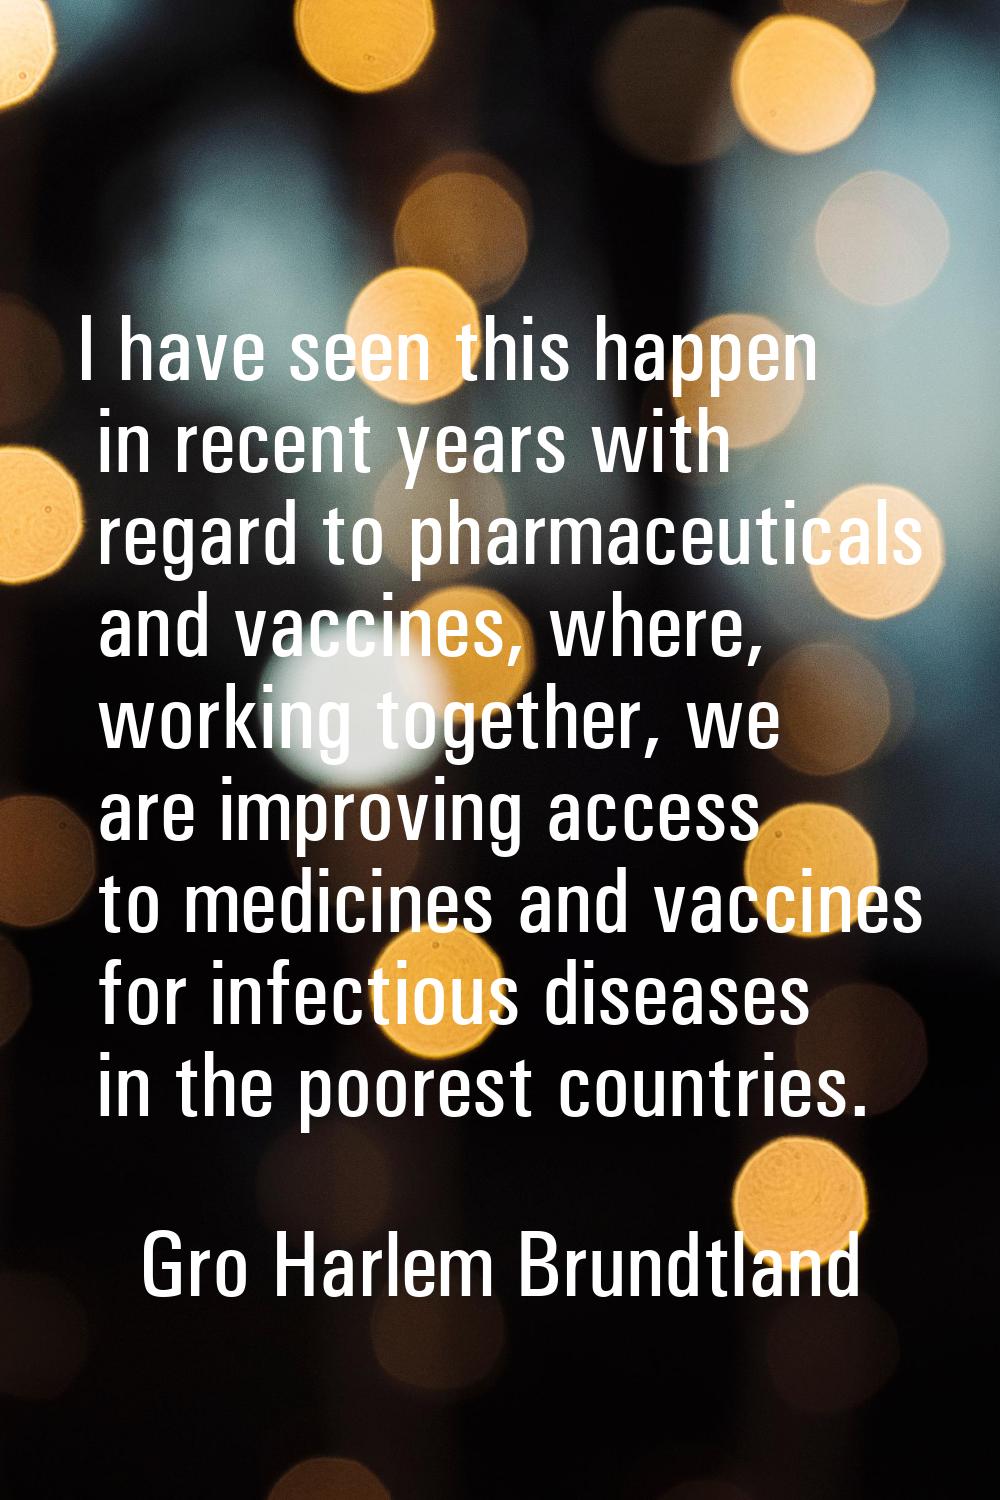 I have seen this happen in recent years with regard to pharmaceuticals and vaccines, where, working